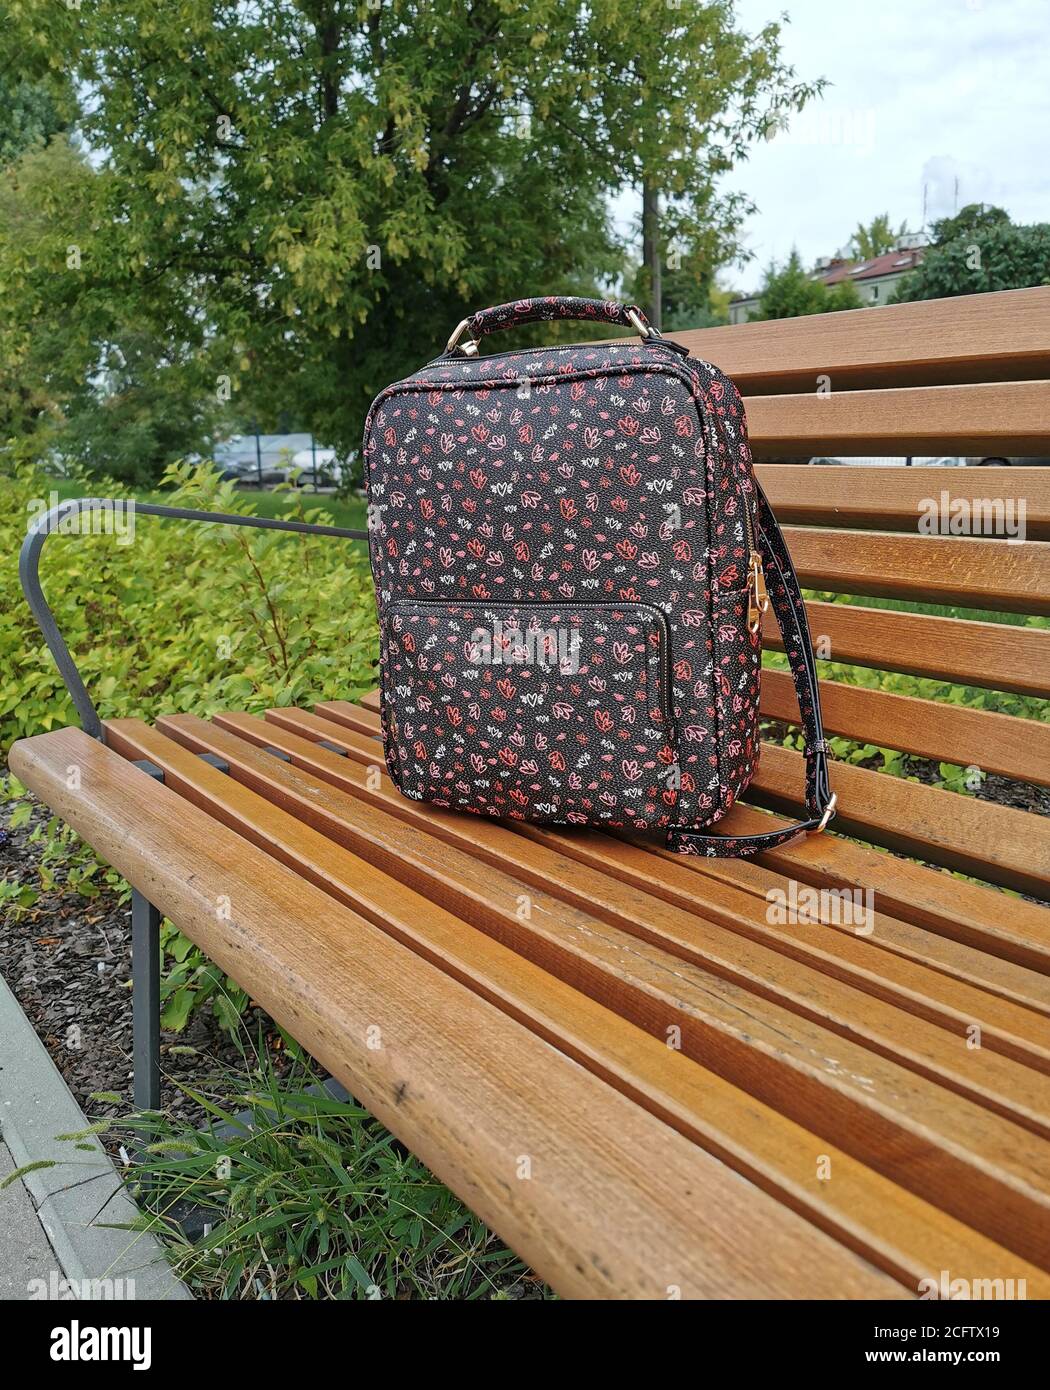 Lost backpack on the bench. The woman lost her backpack on a wooden bench. Stock Photo